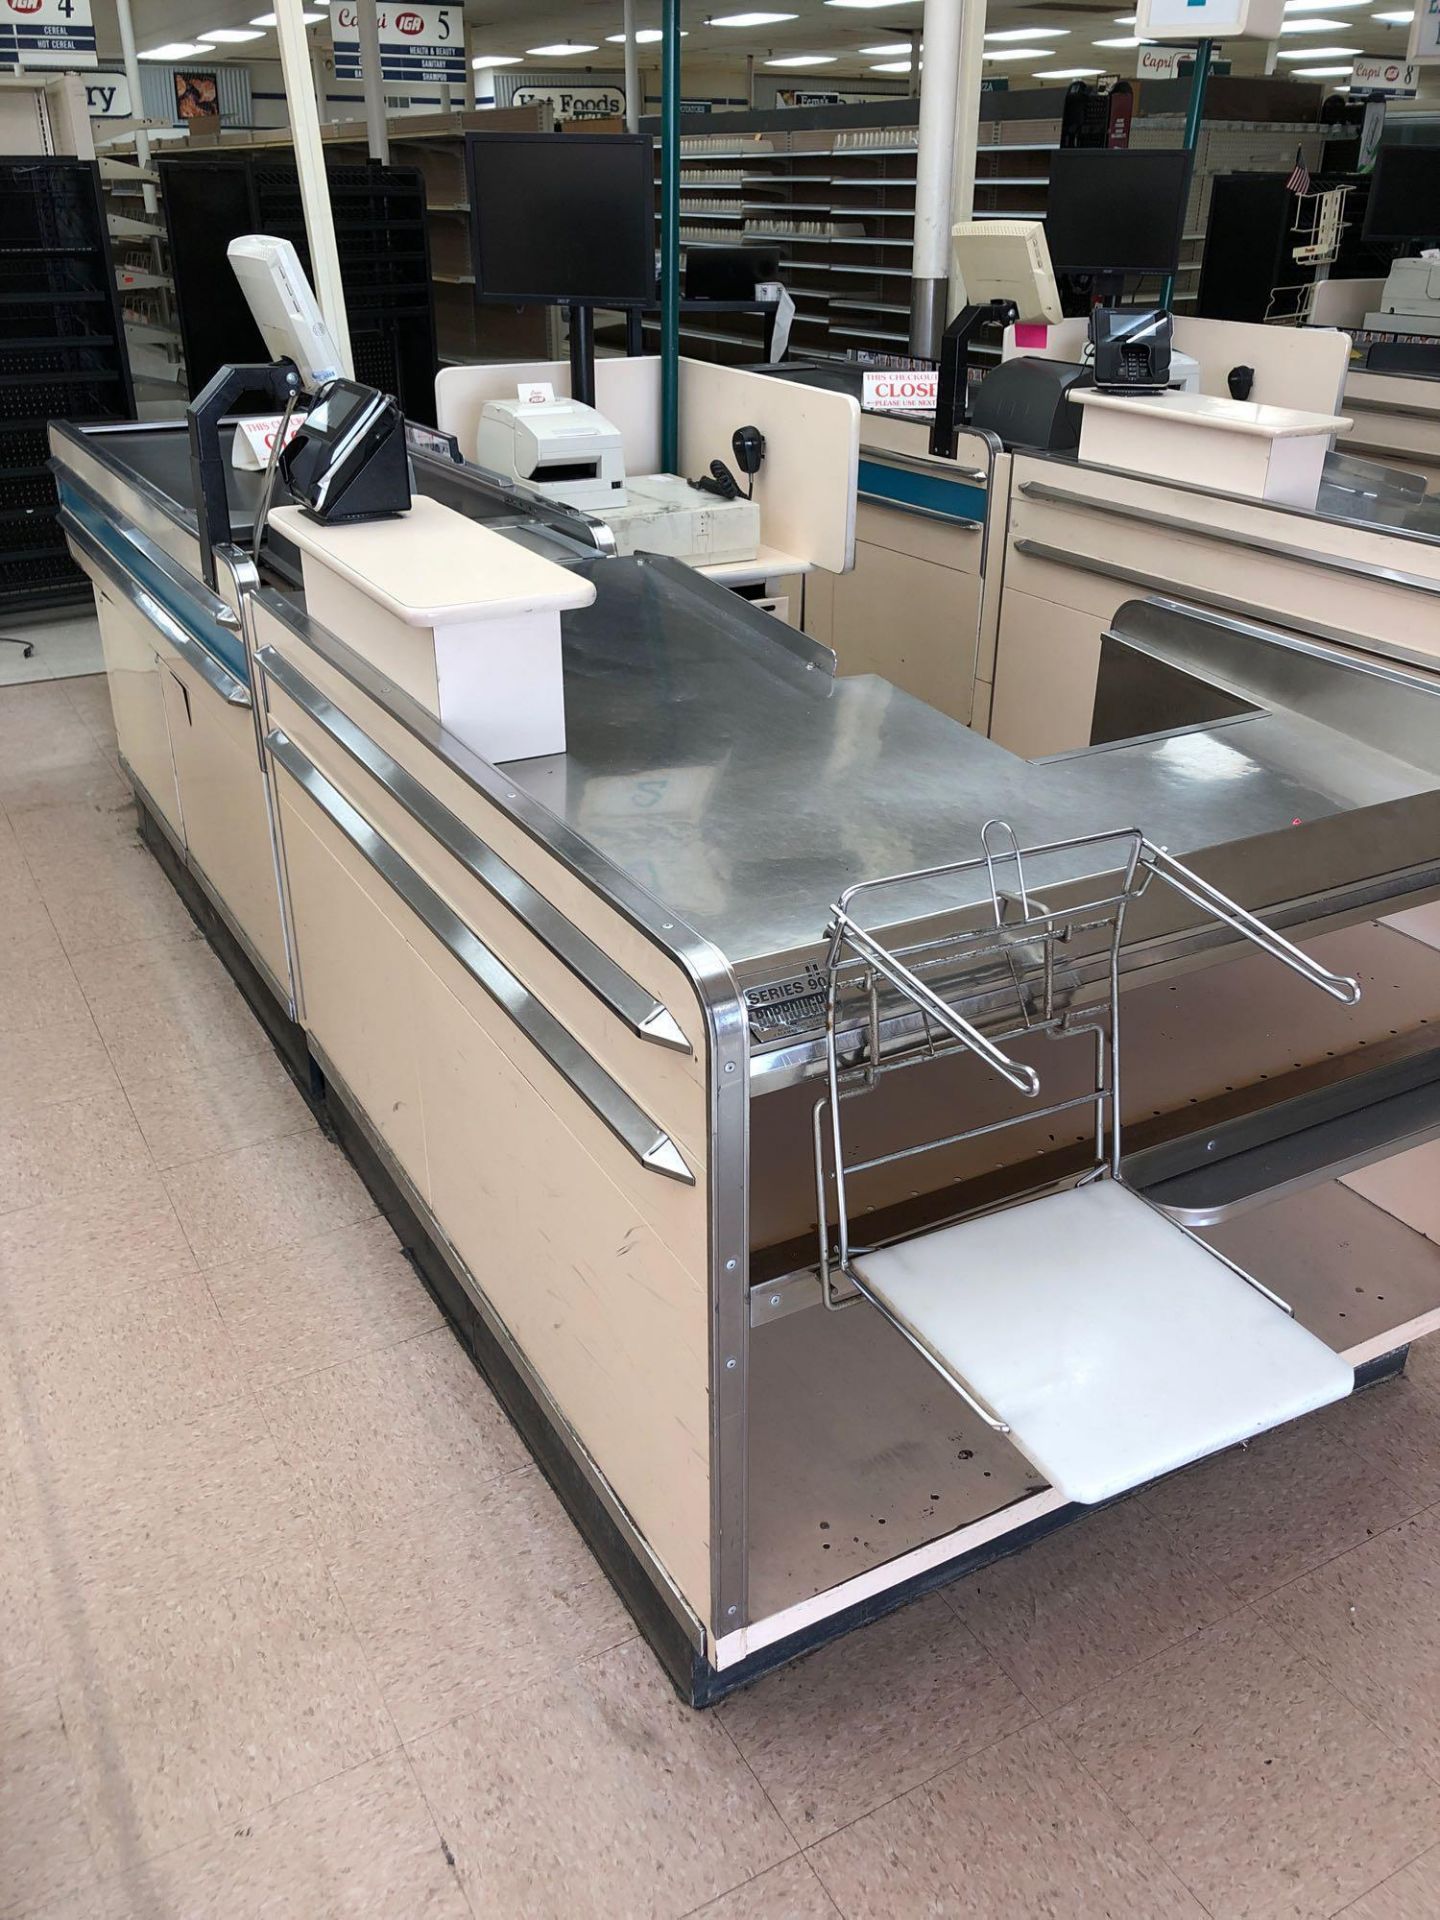 Series 80 Boroughs Conveyer Checkout System - Image 8 of 10